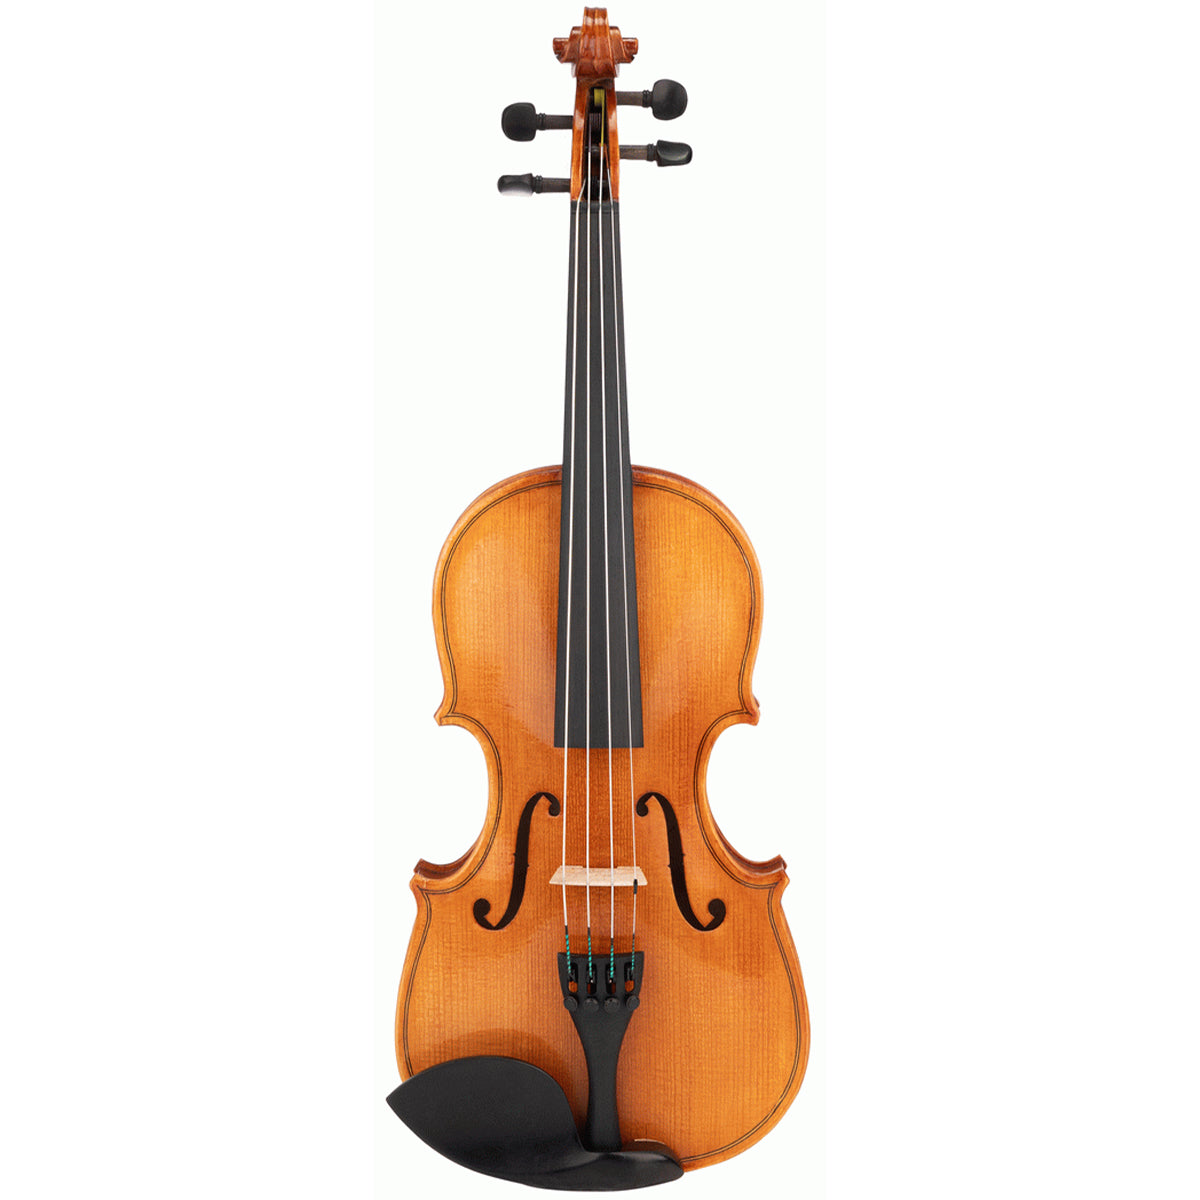 Beale BV114 Violin Standard 1/4 Size Outfit